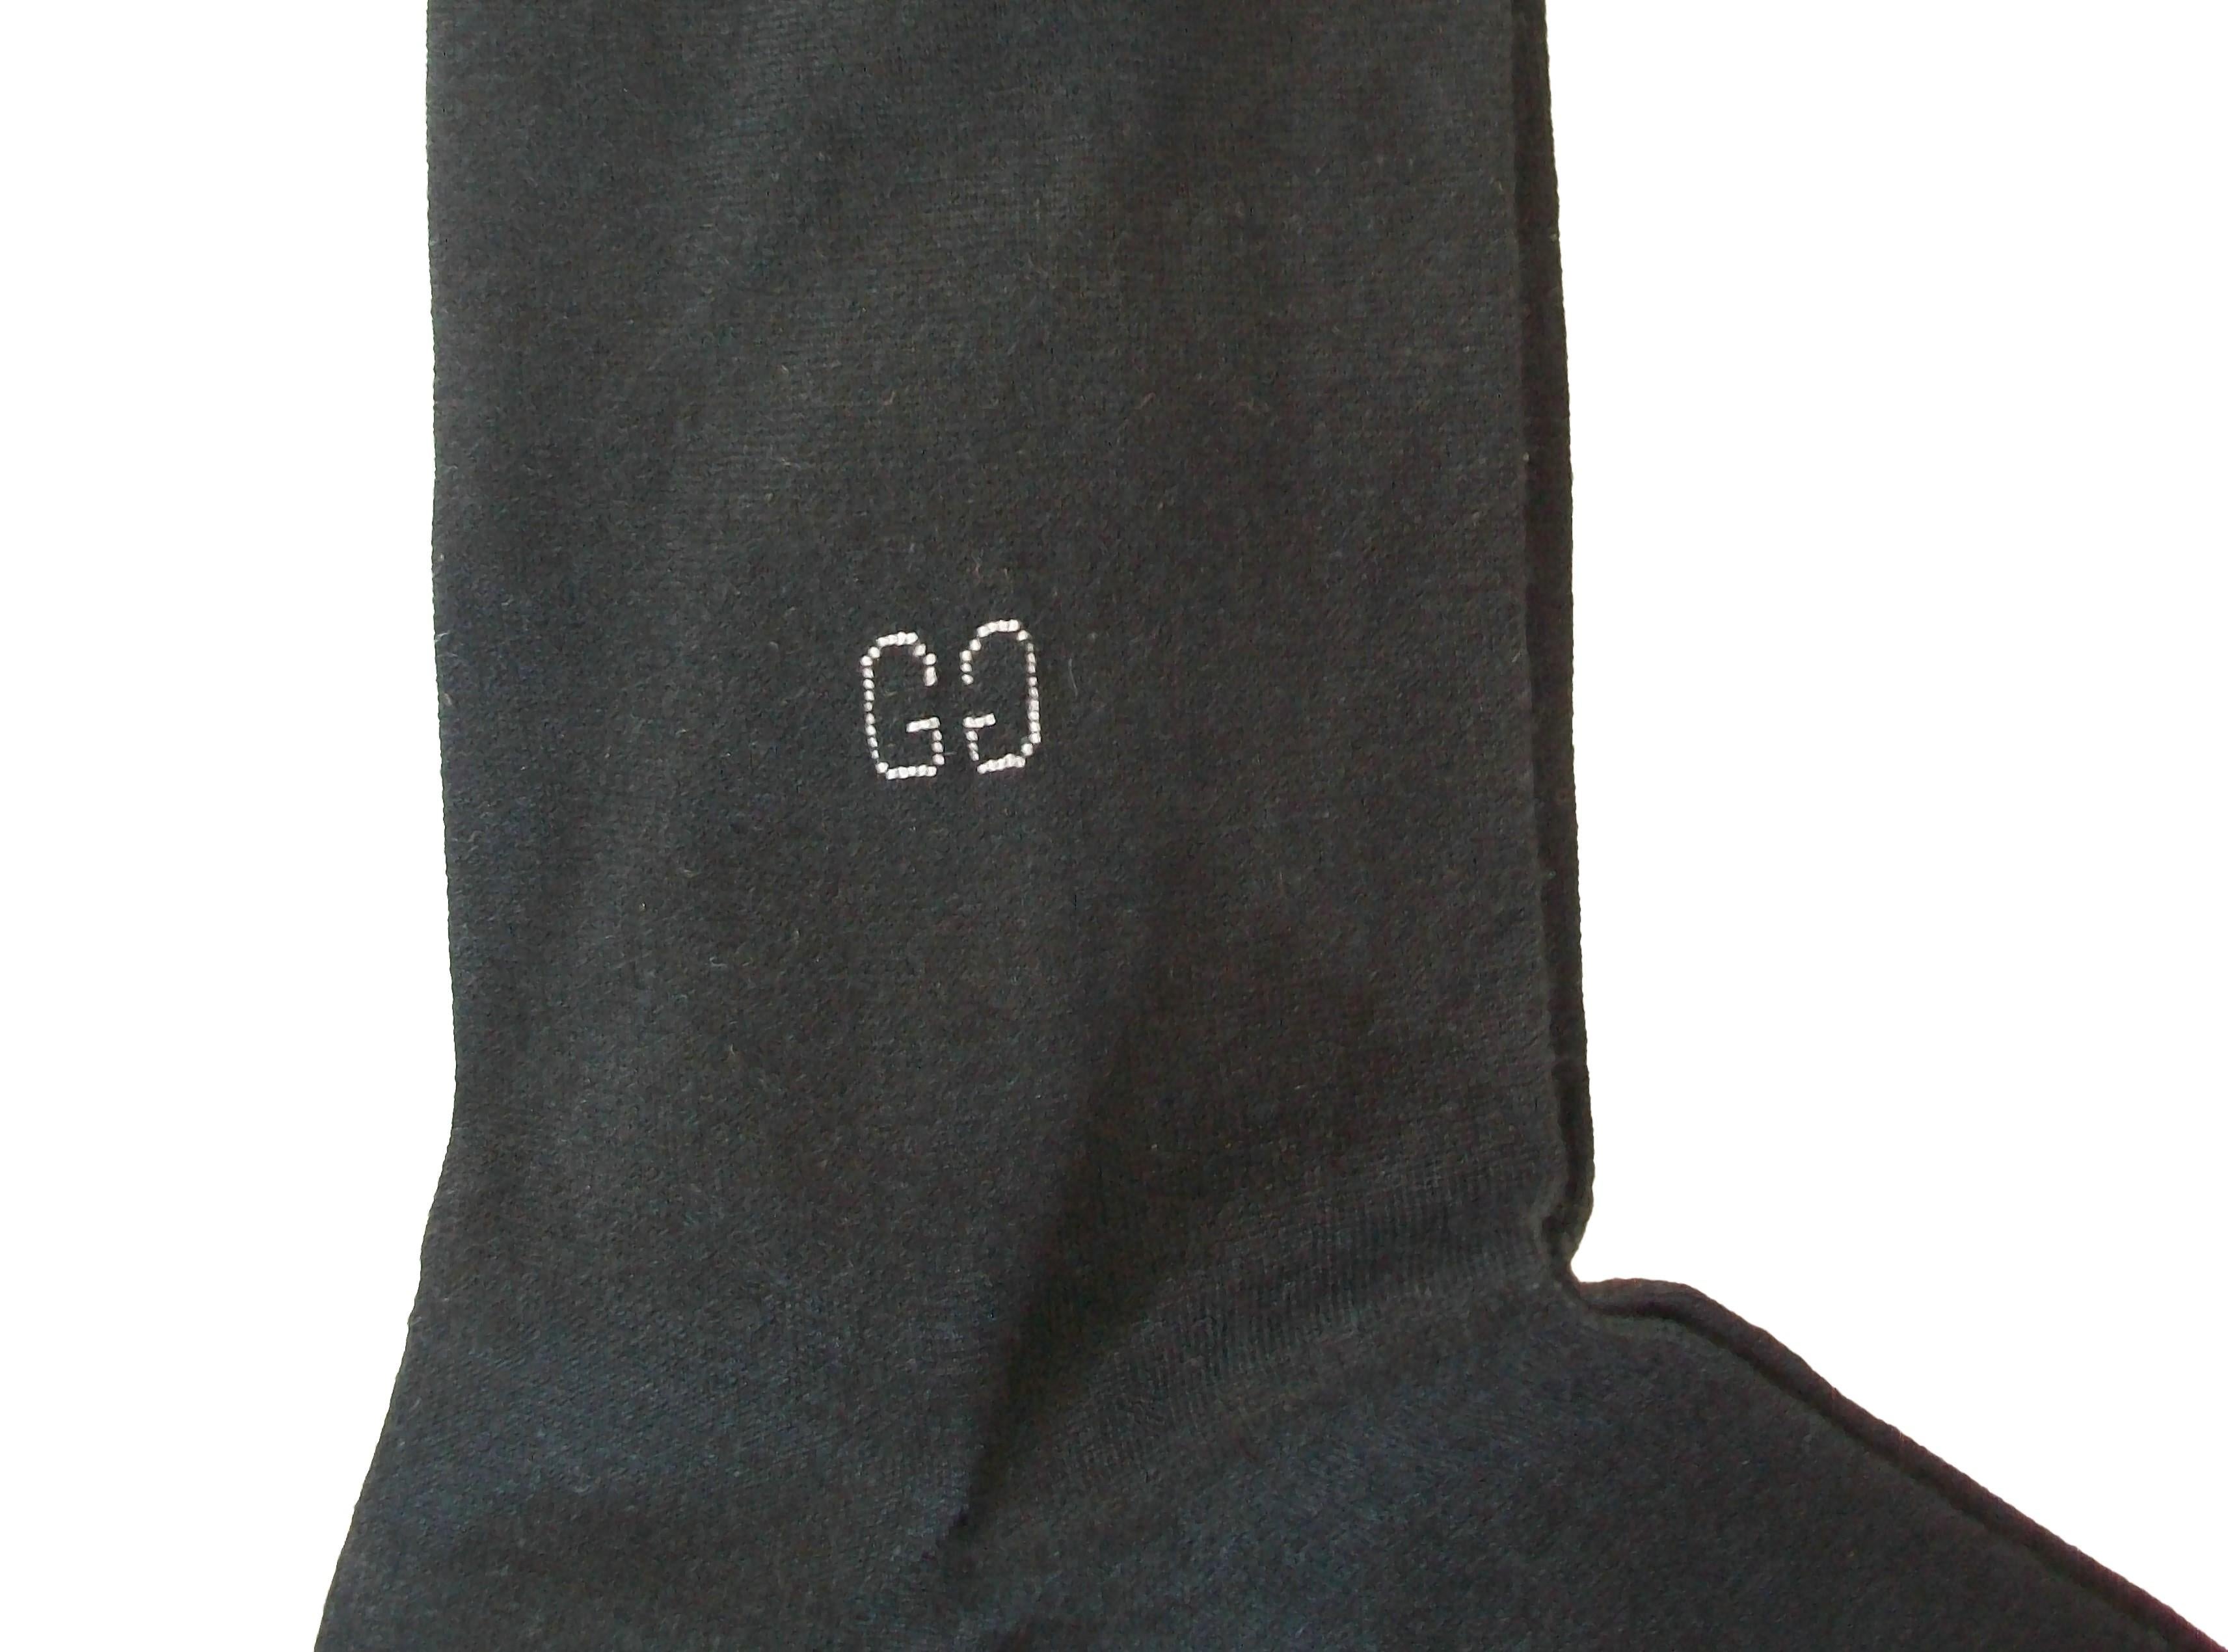 GUCCI - Men's Black Cashmere & Silk Dress Socks - Size 11 - Italy - Circa 1980's In Excellent Condition For Sale In Chatham, ON